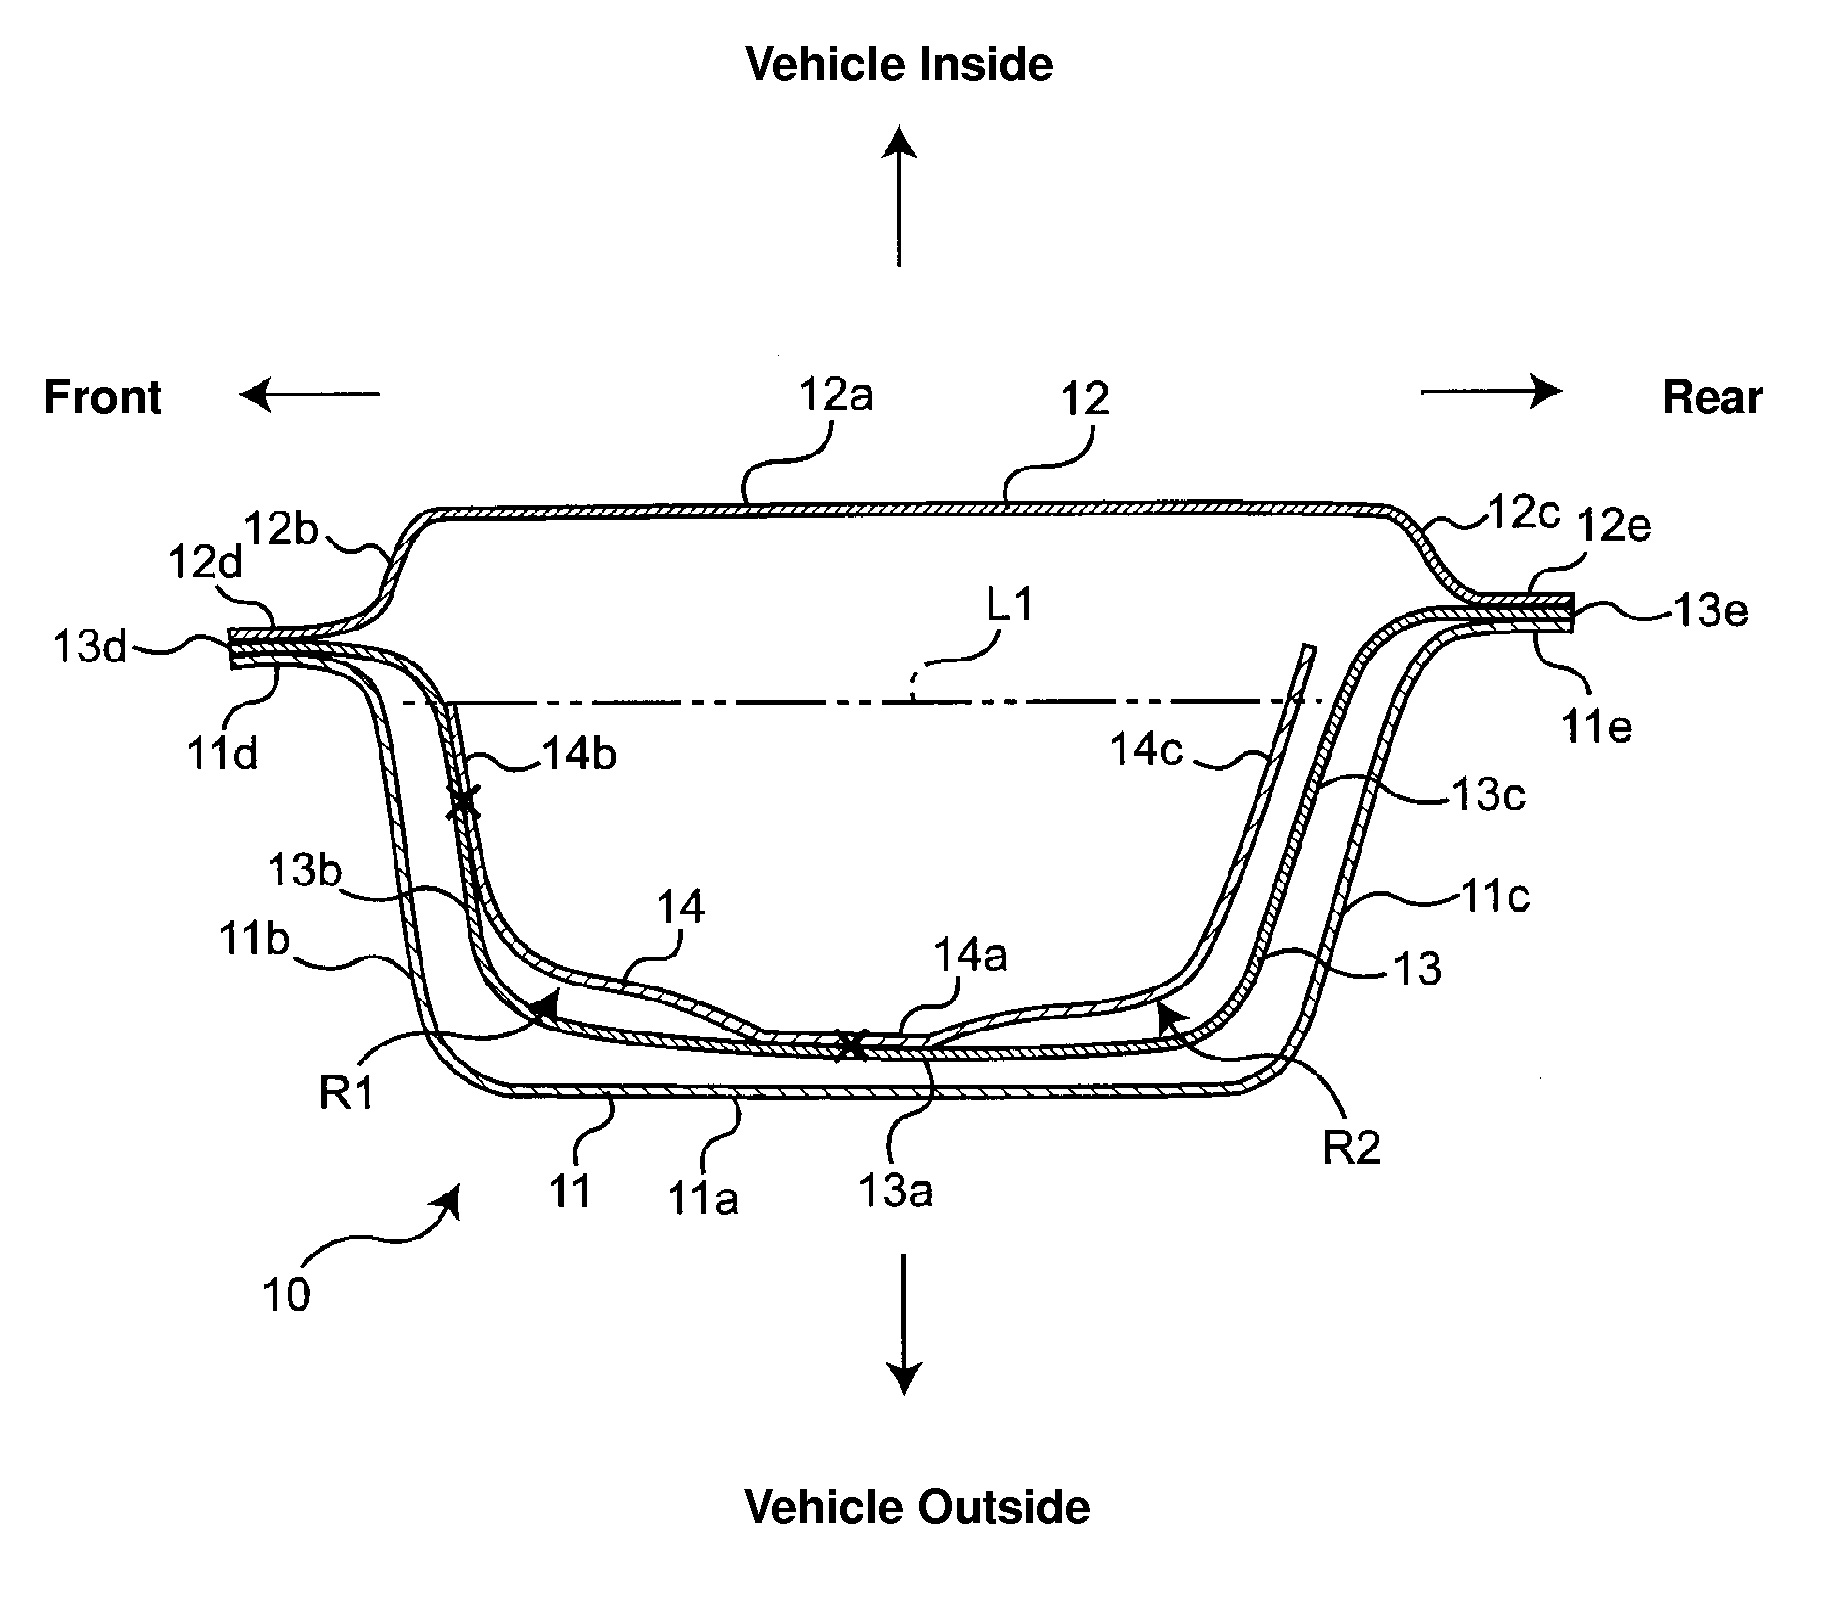 Vehicle-body side portion structure of vehicle